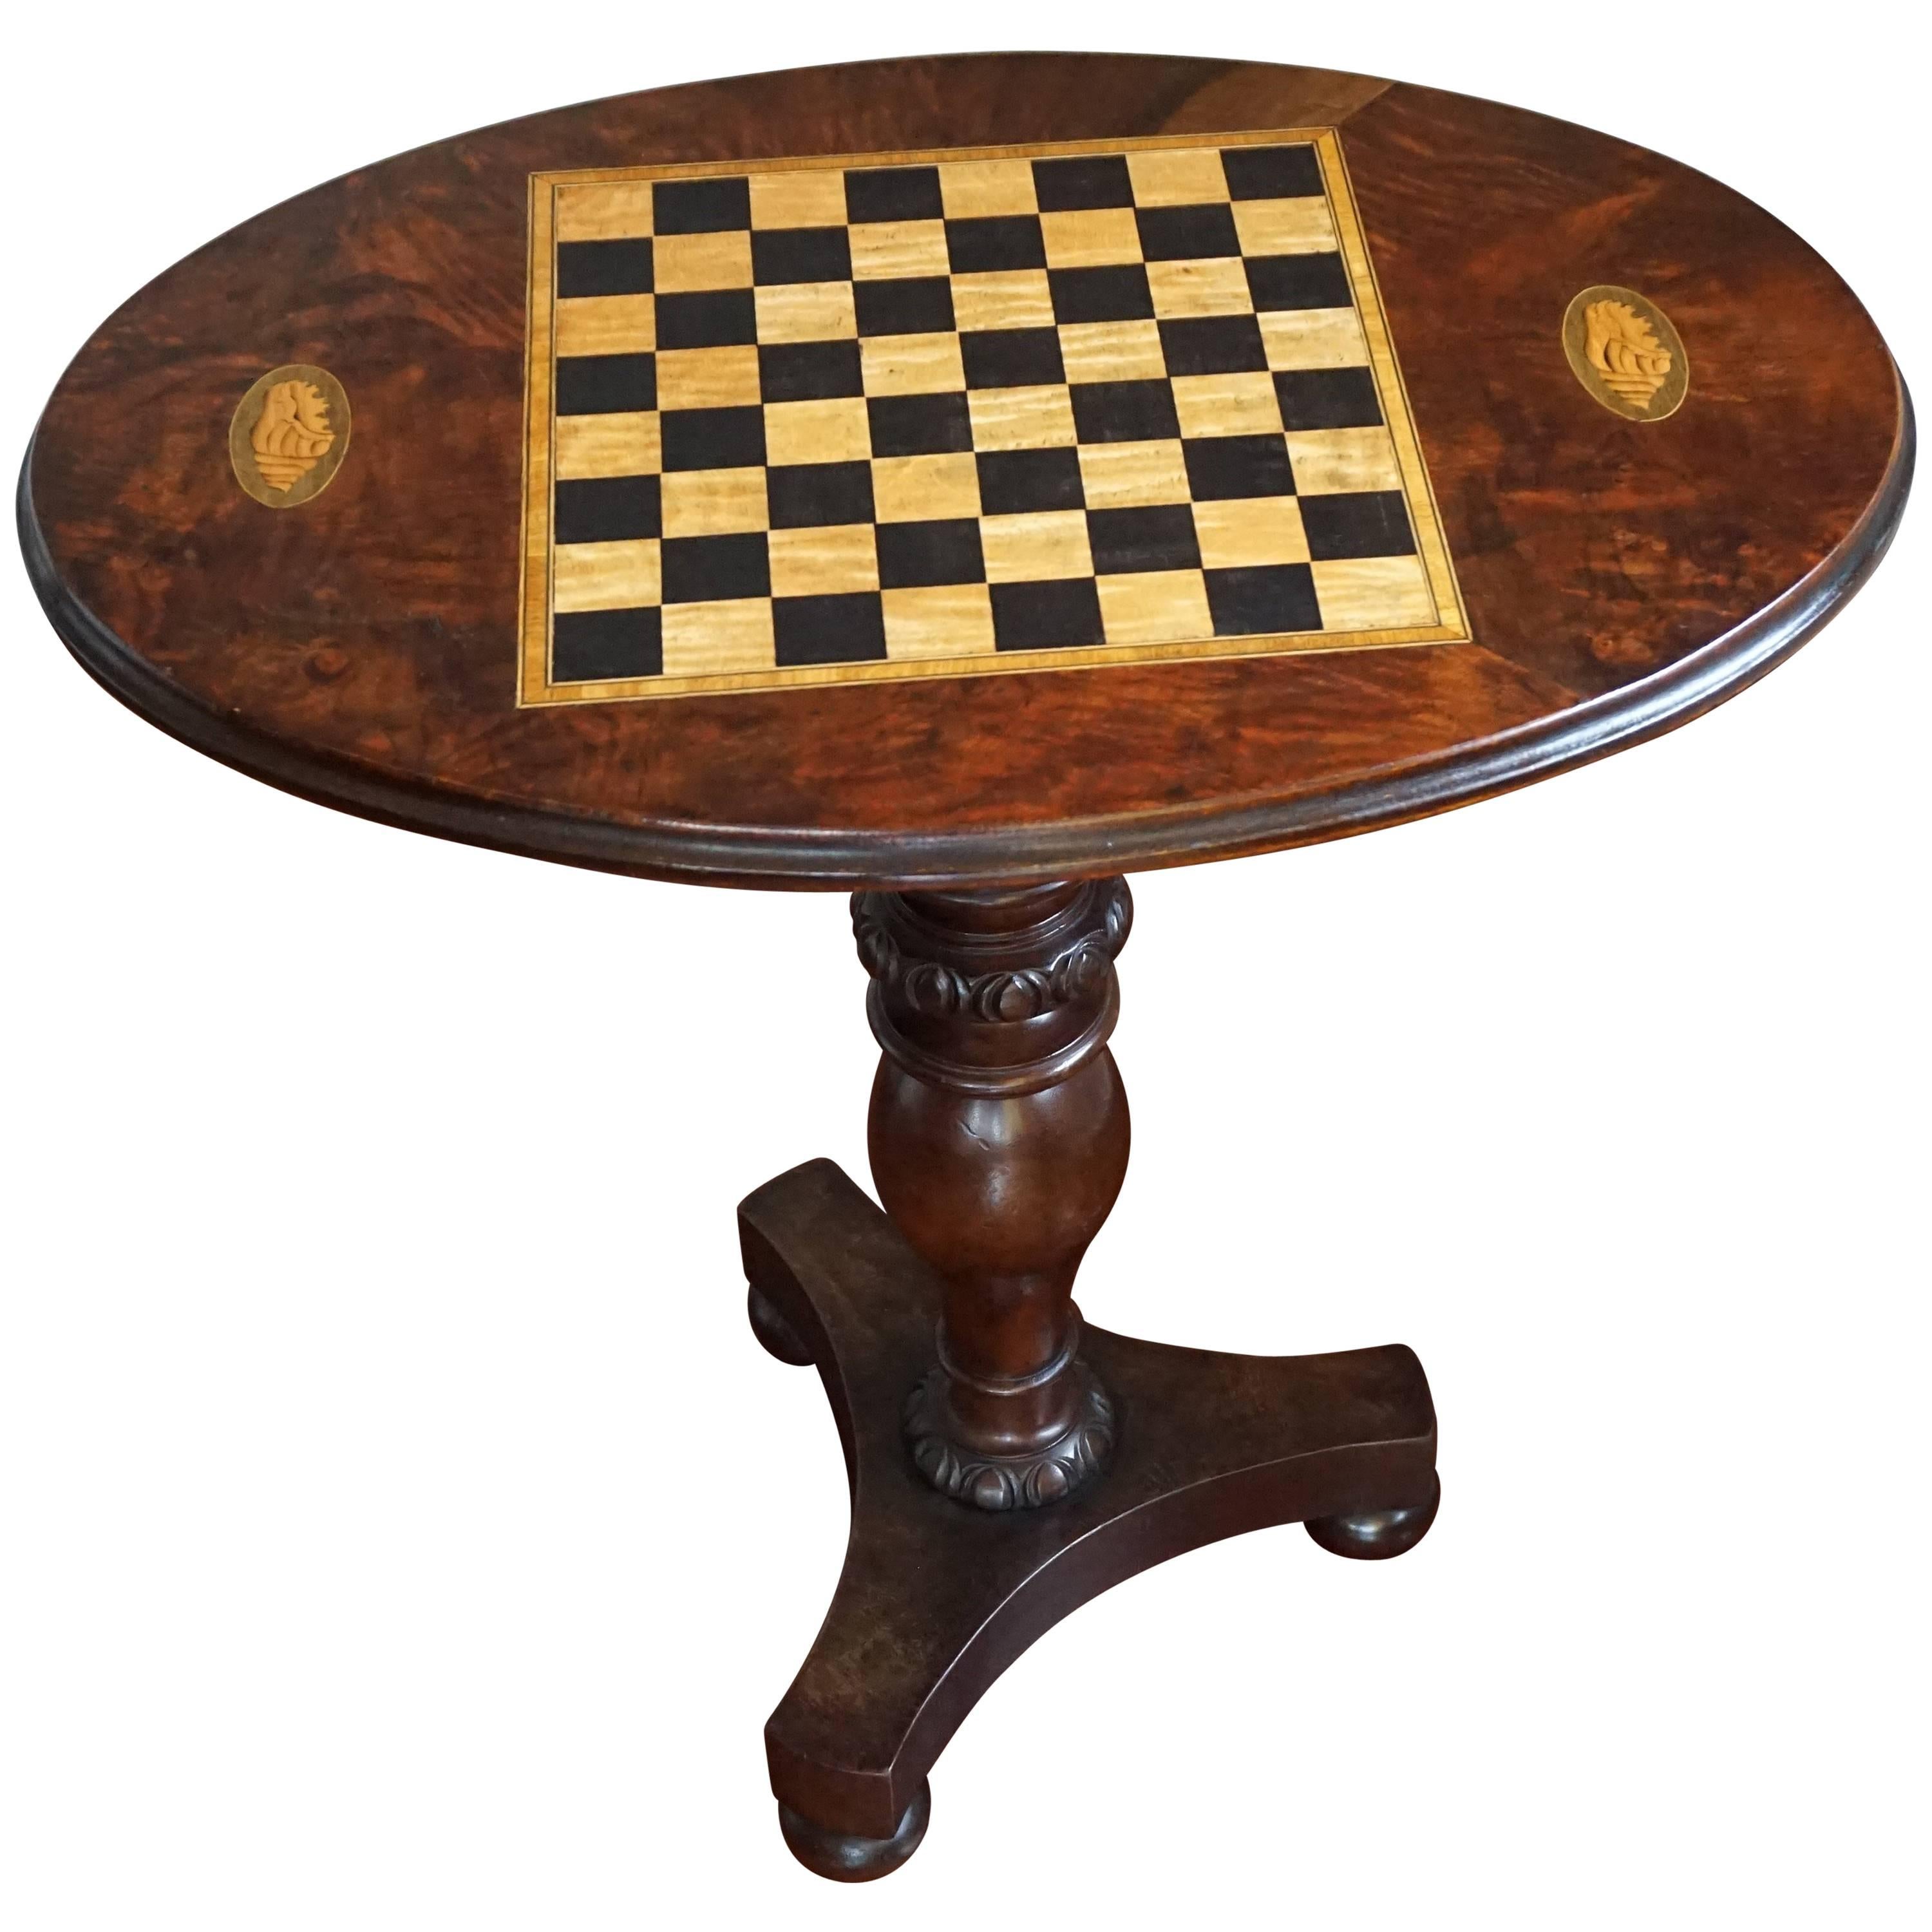 Antique Nutwood and Burl Nutwood Tilt-Top Chess Table with Nautilus Shell Inlay